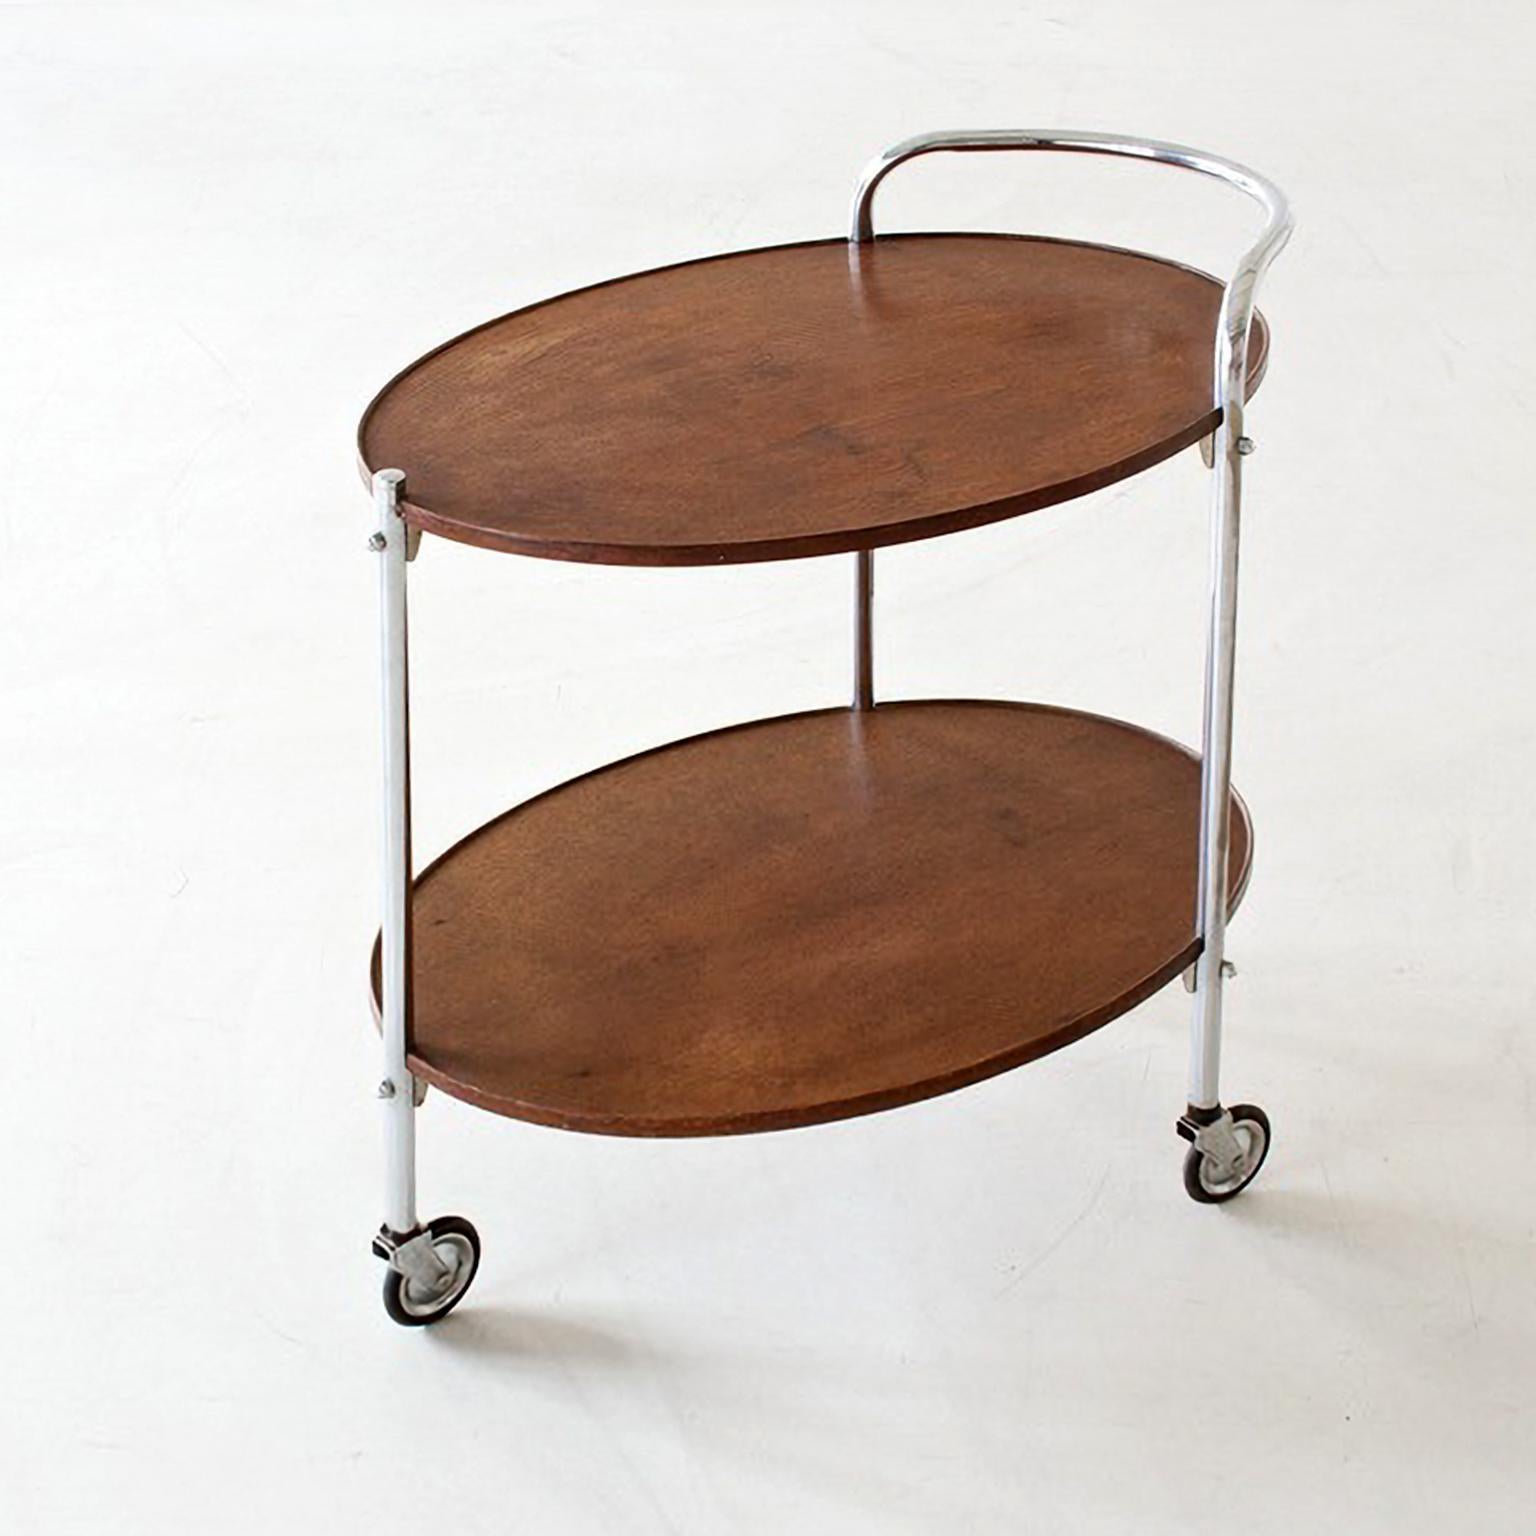 Art Deco Modernist Serving Trolley with Two Oval Wooden Shelves Chromed Metal, circa 1930 For Sale